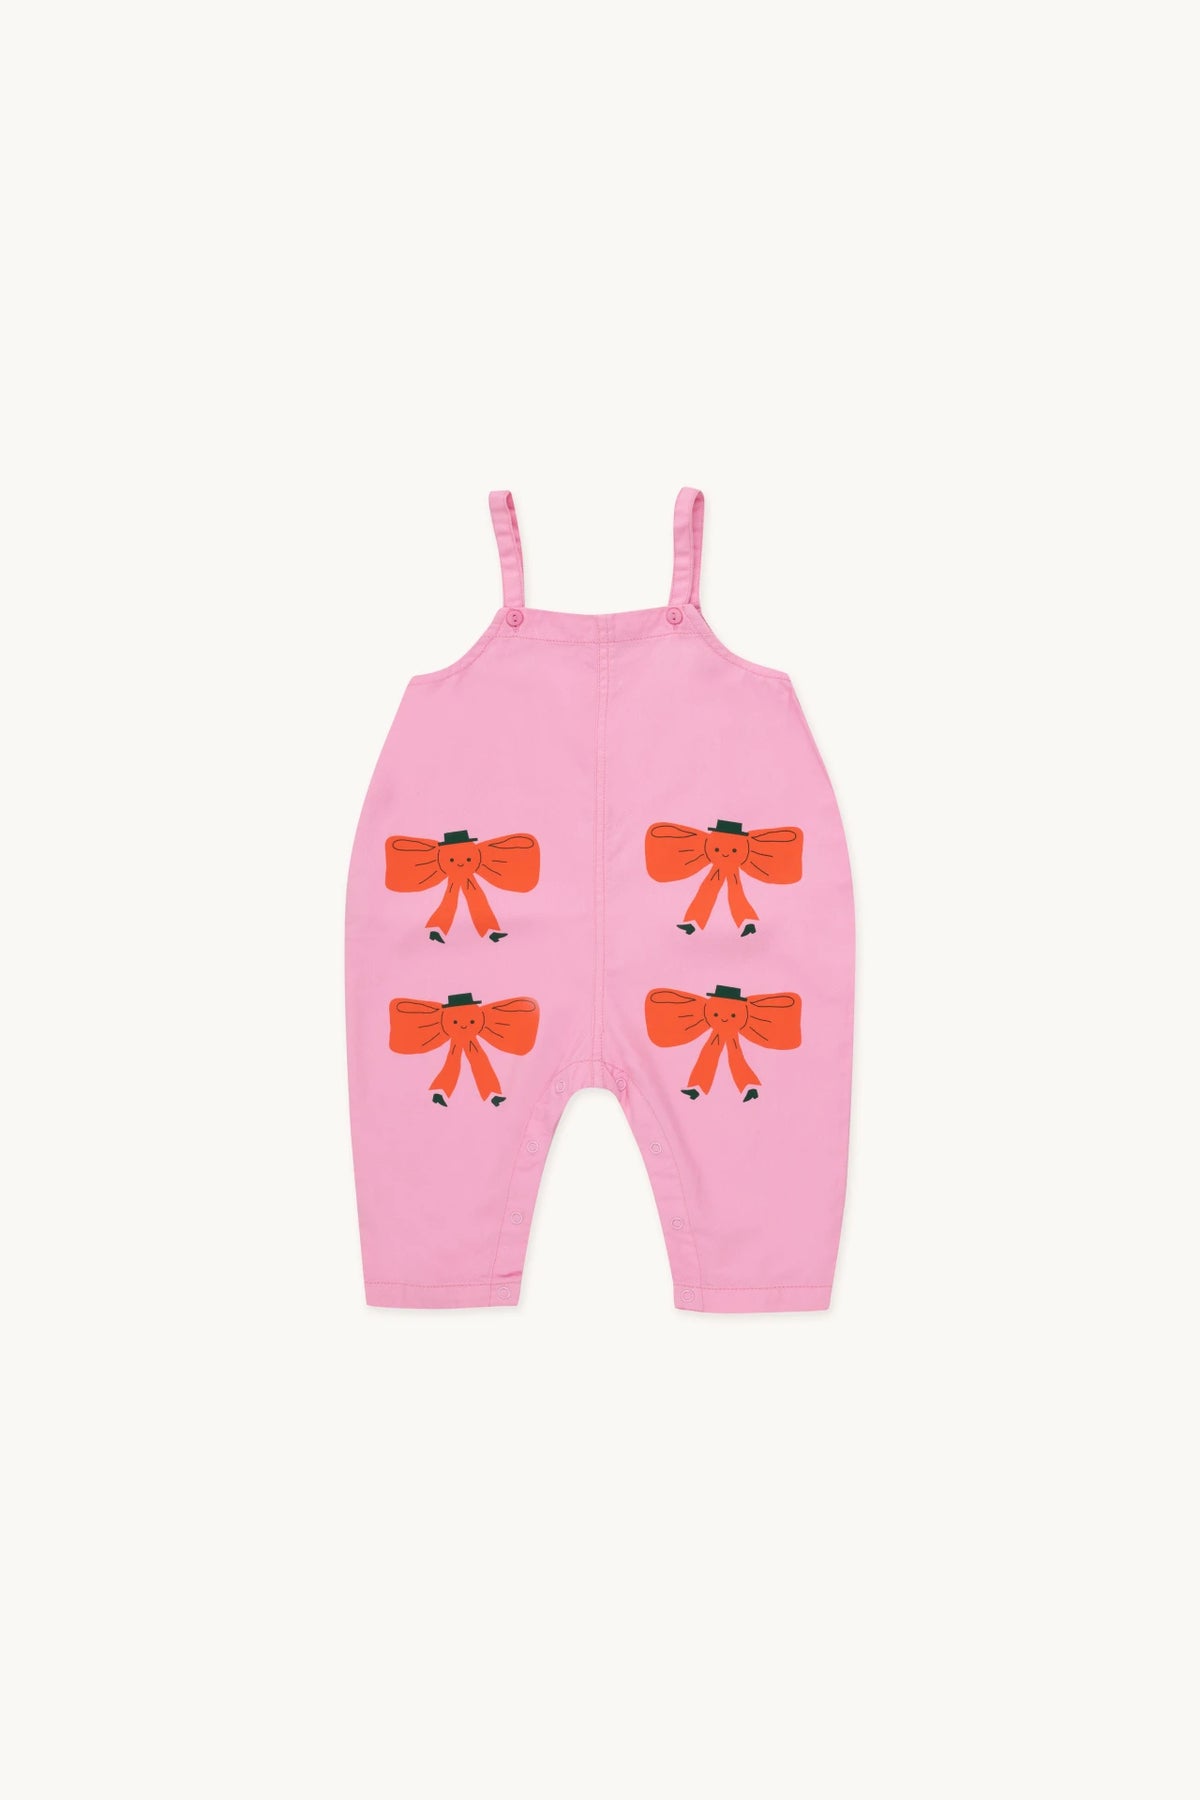 tiny cottons tiny bow baby dungaree - pink